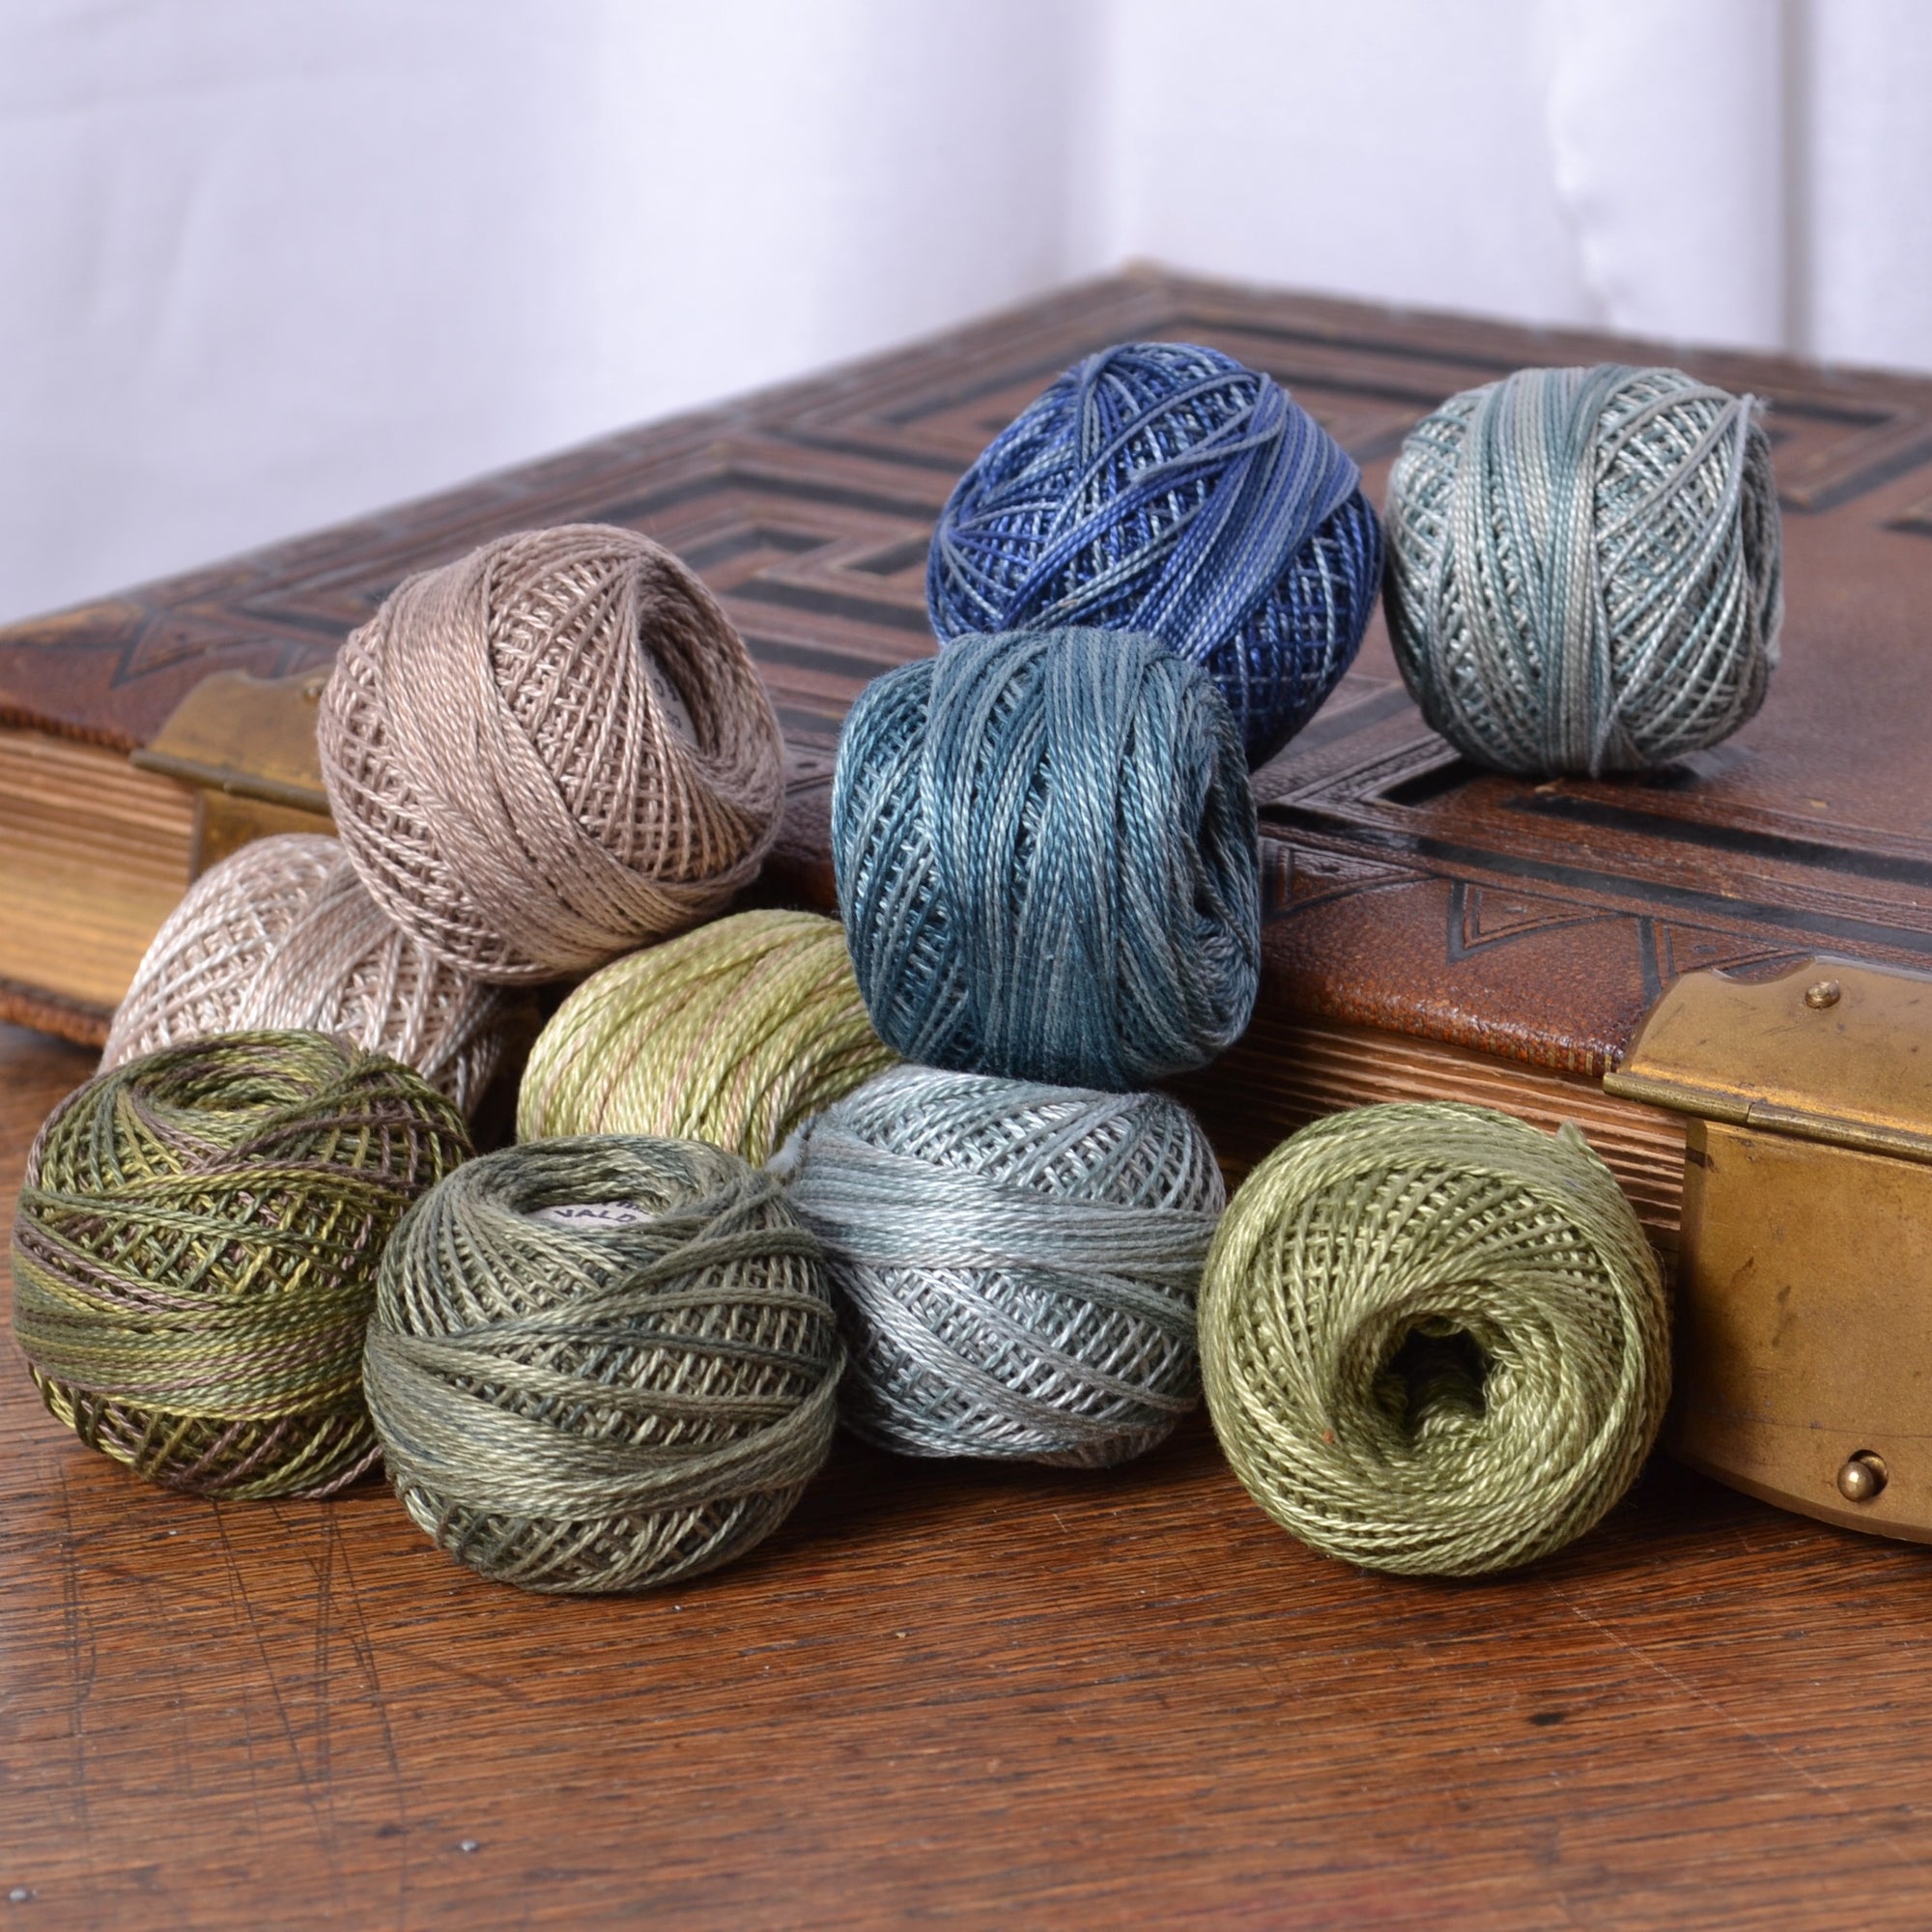 Valdani cotton threads in blues and greens